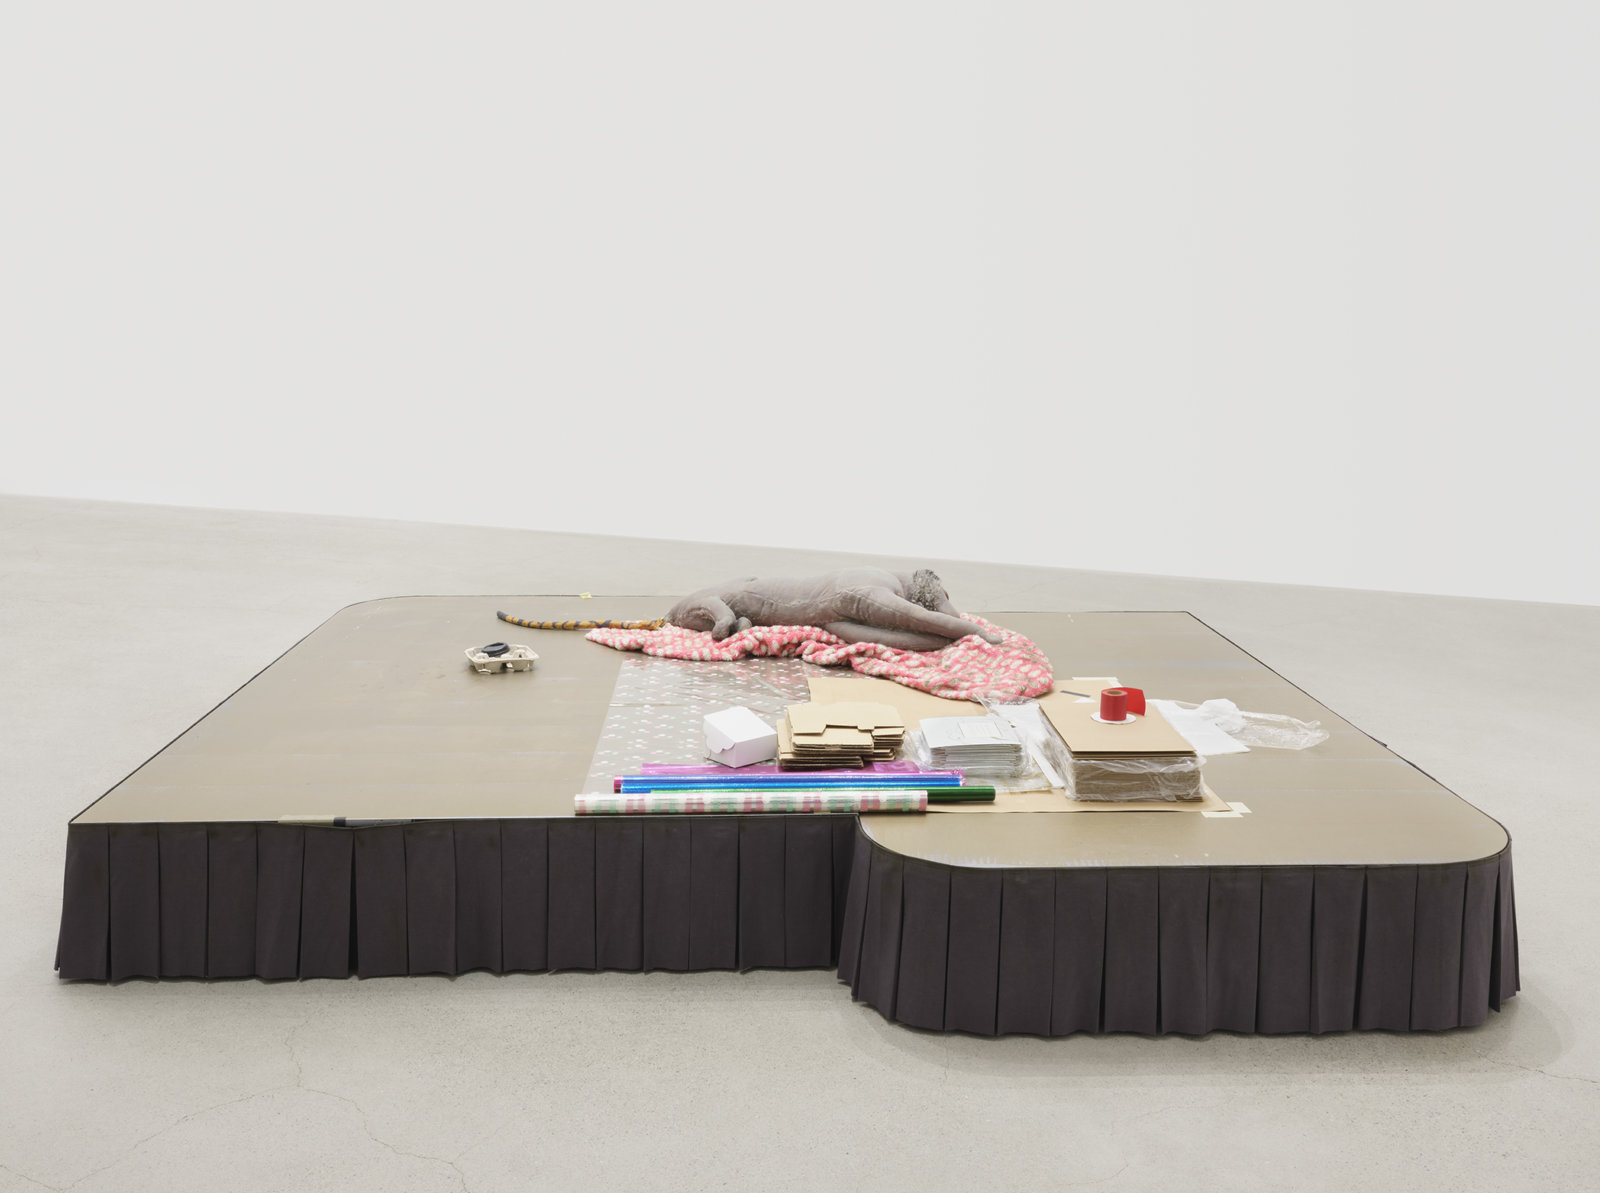 Liz Magor, Shaved, 2020, painted plywood, fabric skirting, silicone rubber, faux fur, toy tail, packaging materials, 23 x 120 x 109 in. (58 x 305 x 277 cm)